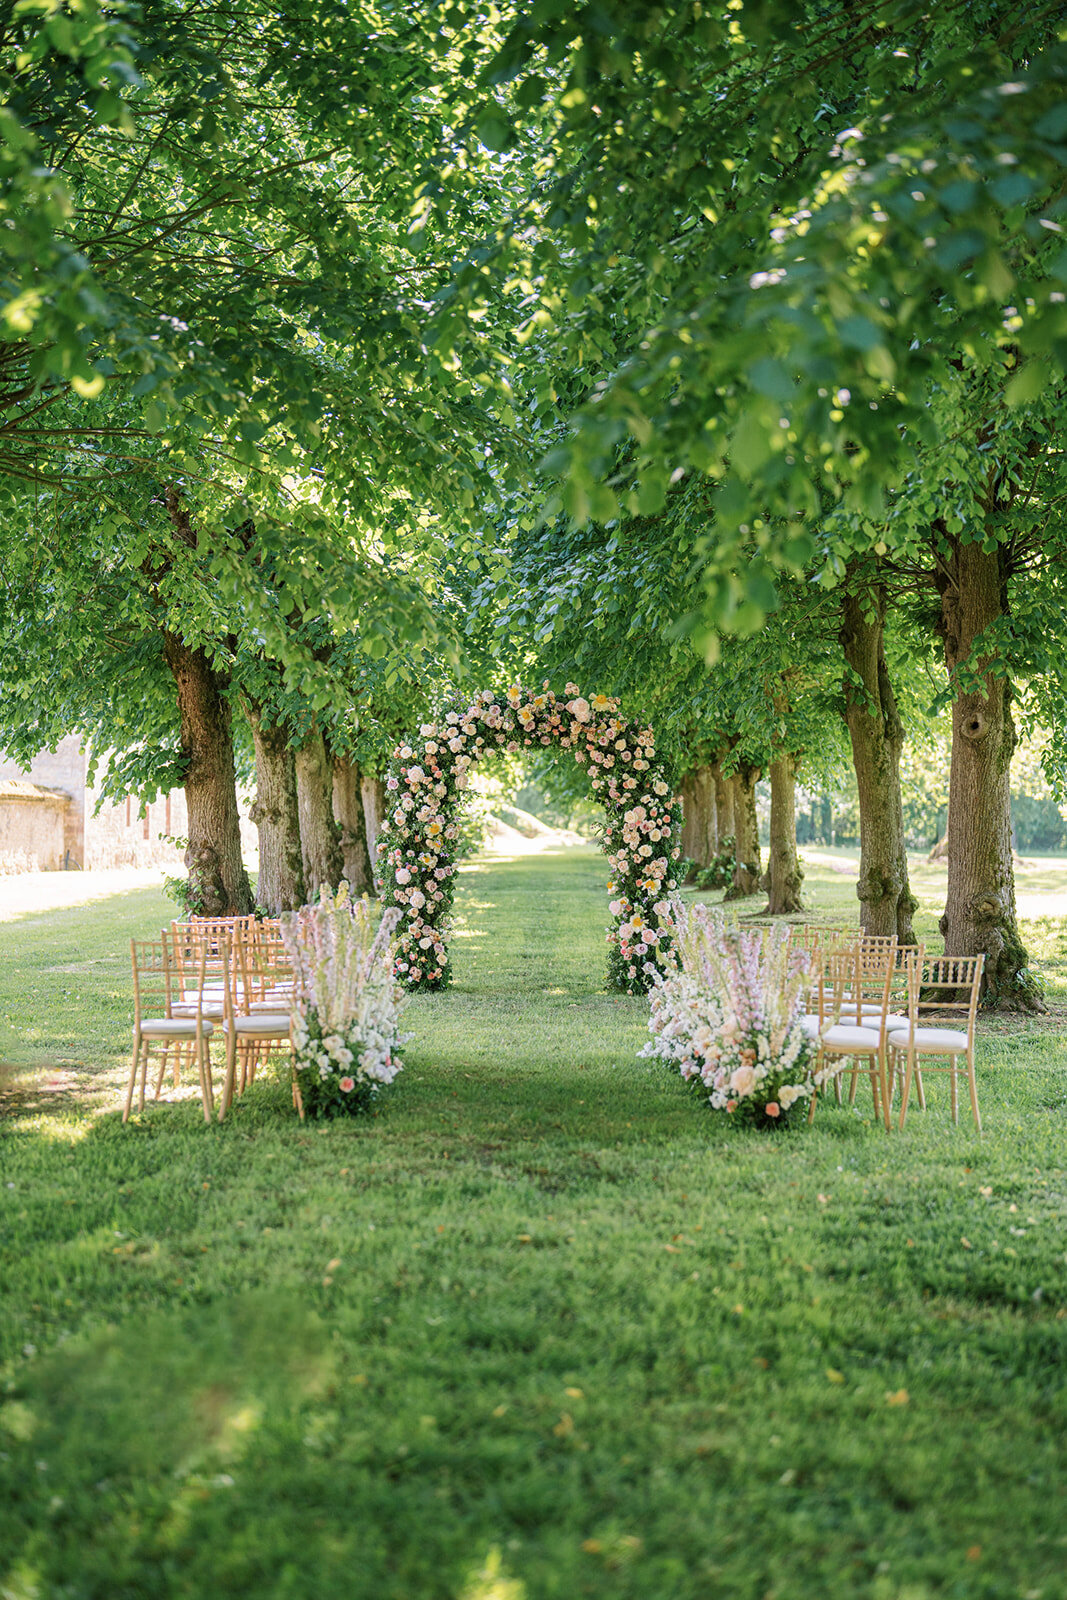 Jennifer Fox Weddings English speaking wedding planning & design agency in France crafting refined and bespoke weddings and celebrations Provence, Paris and destination A&T's Wedding - Harriette Earnshaw Photography-259